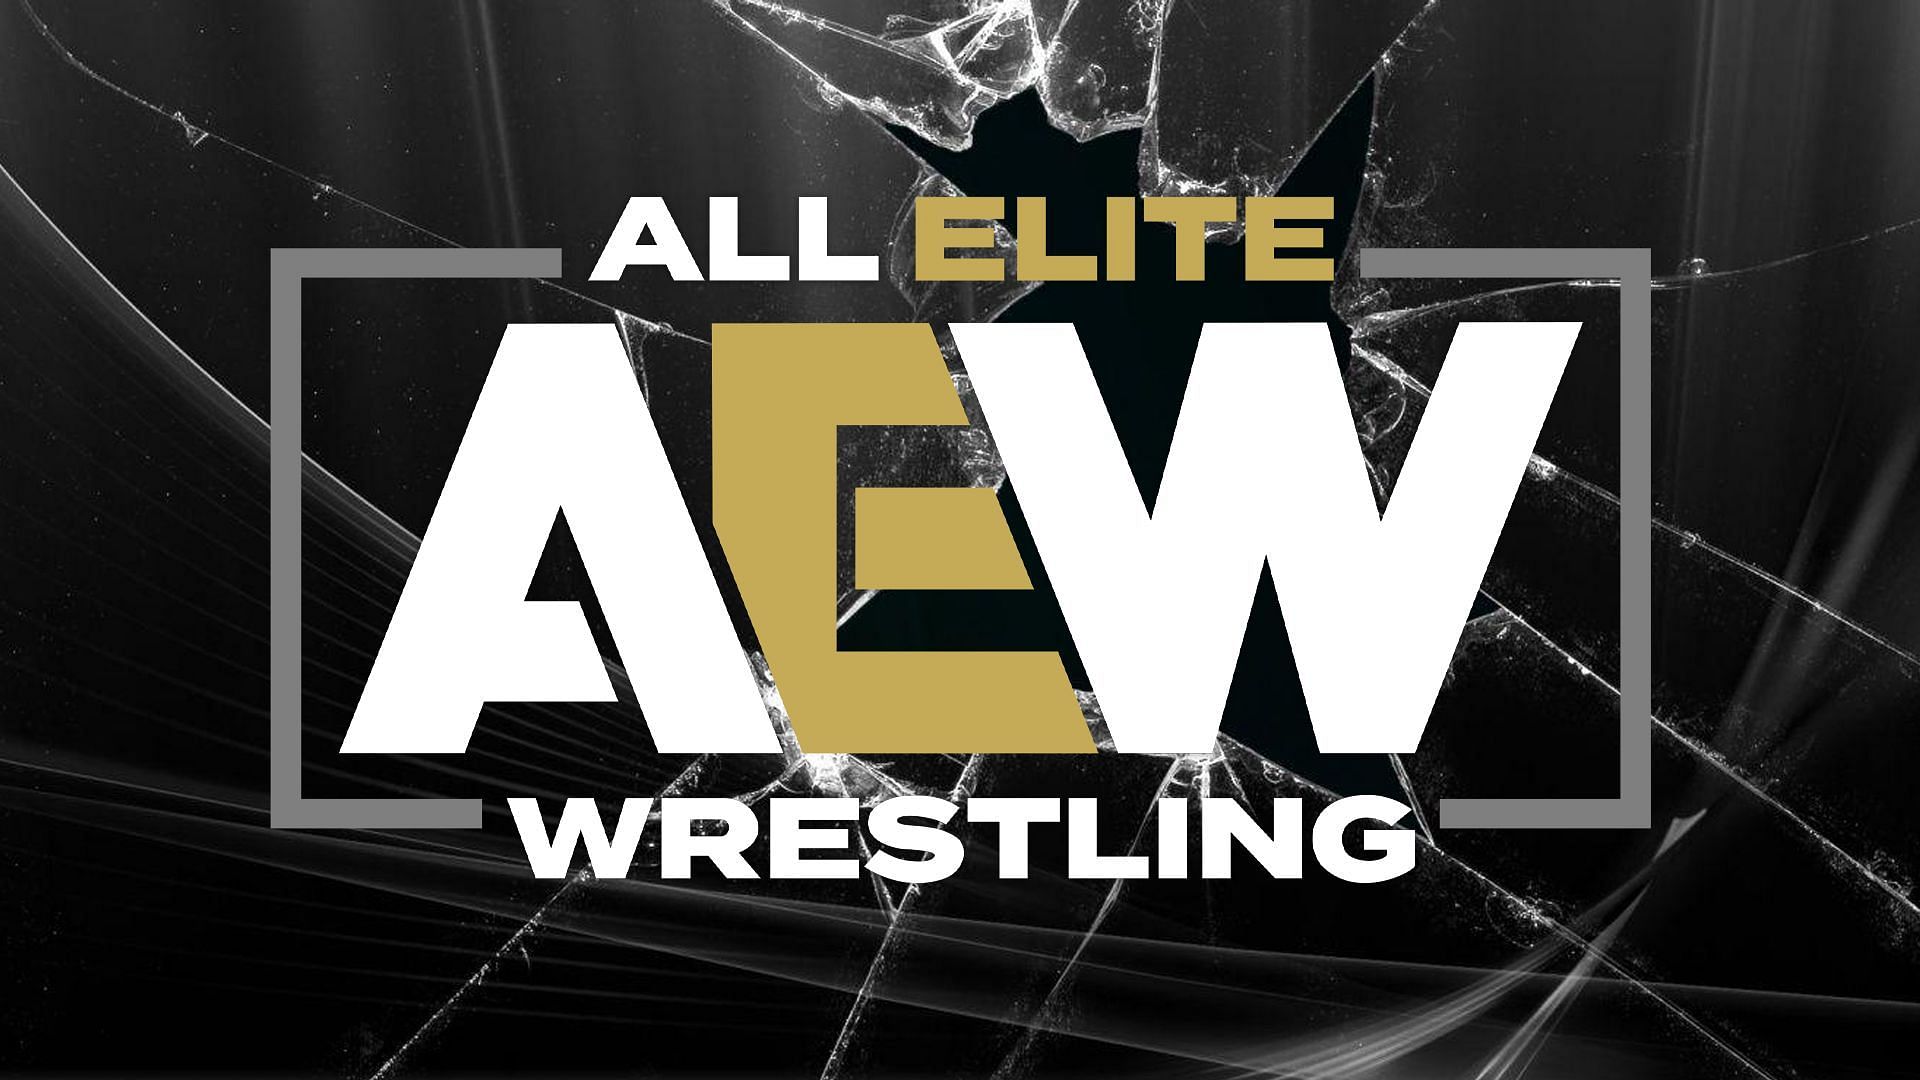 All Elite Wrestling has been having issues with attendance